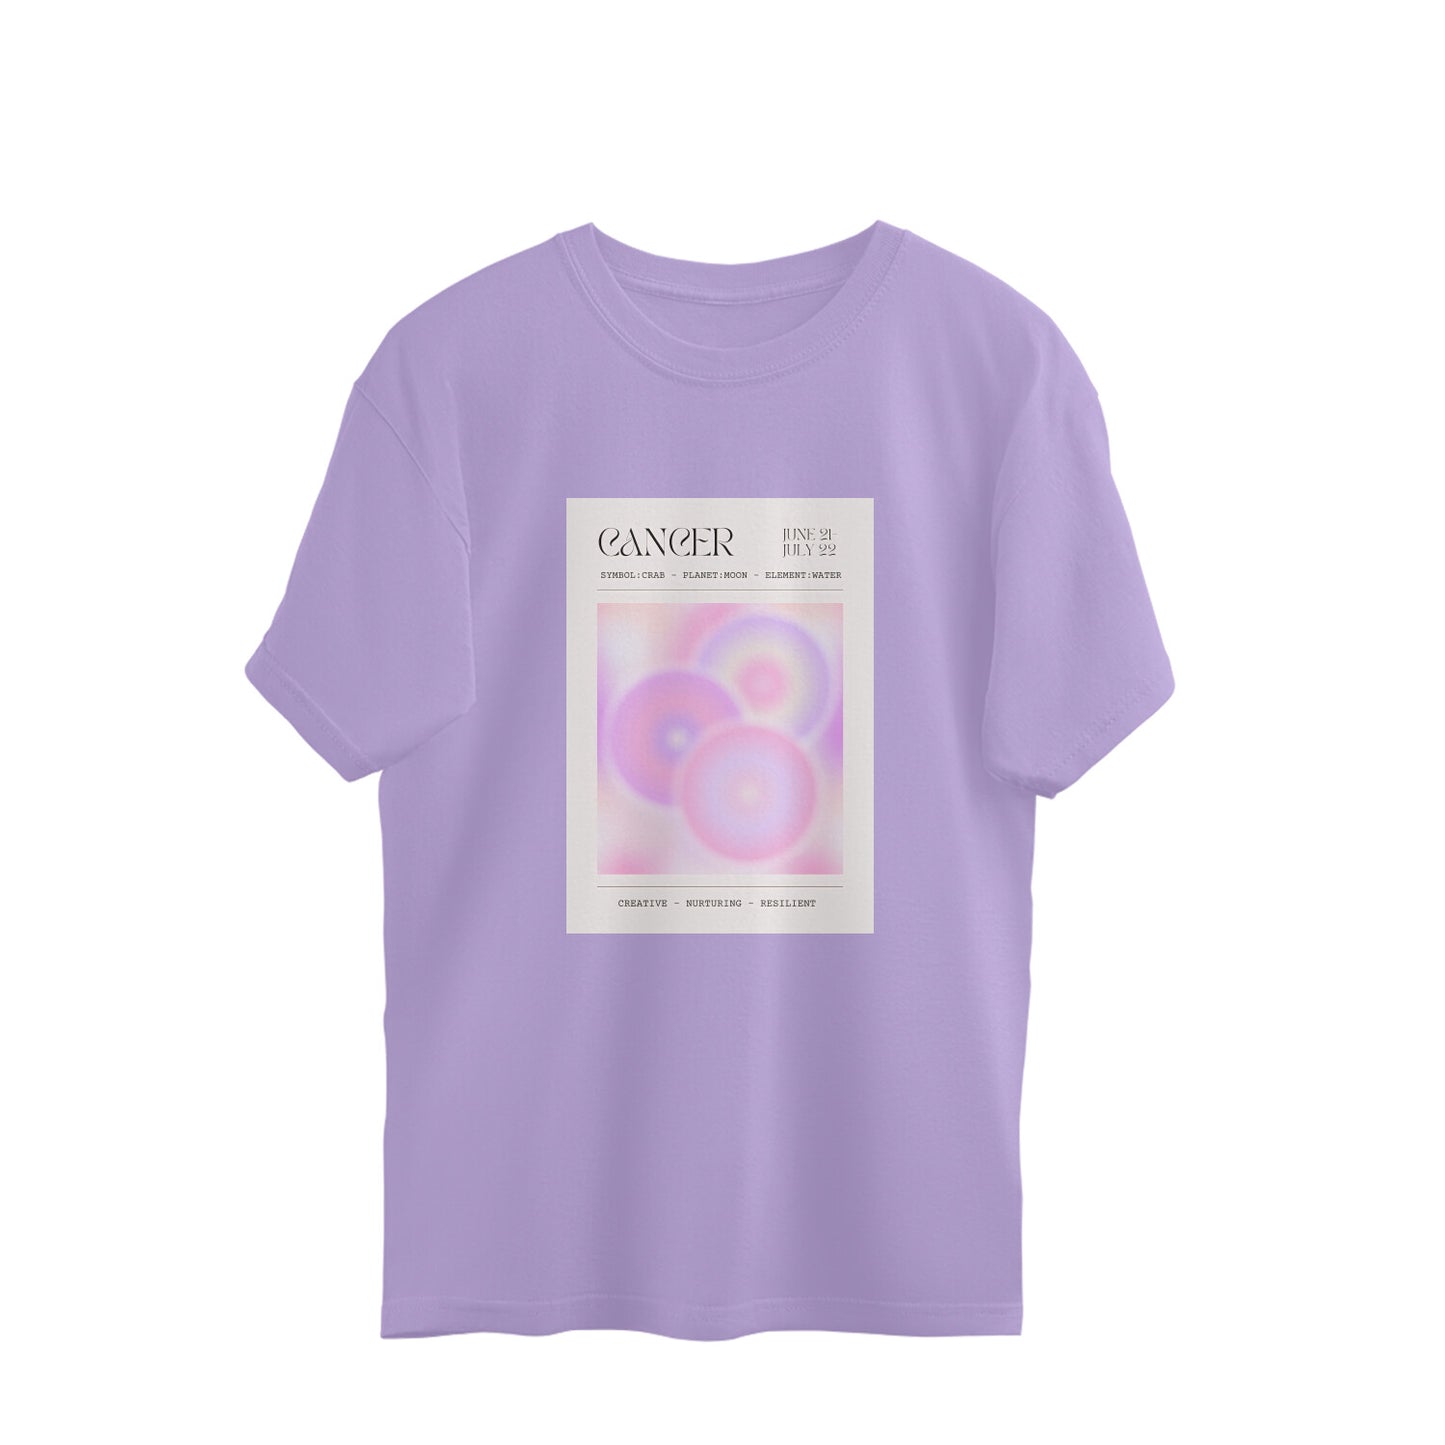 Cancer Oversized Fit Tee